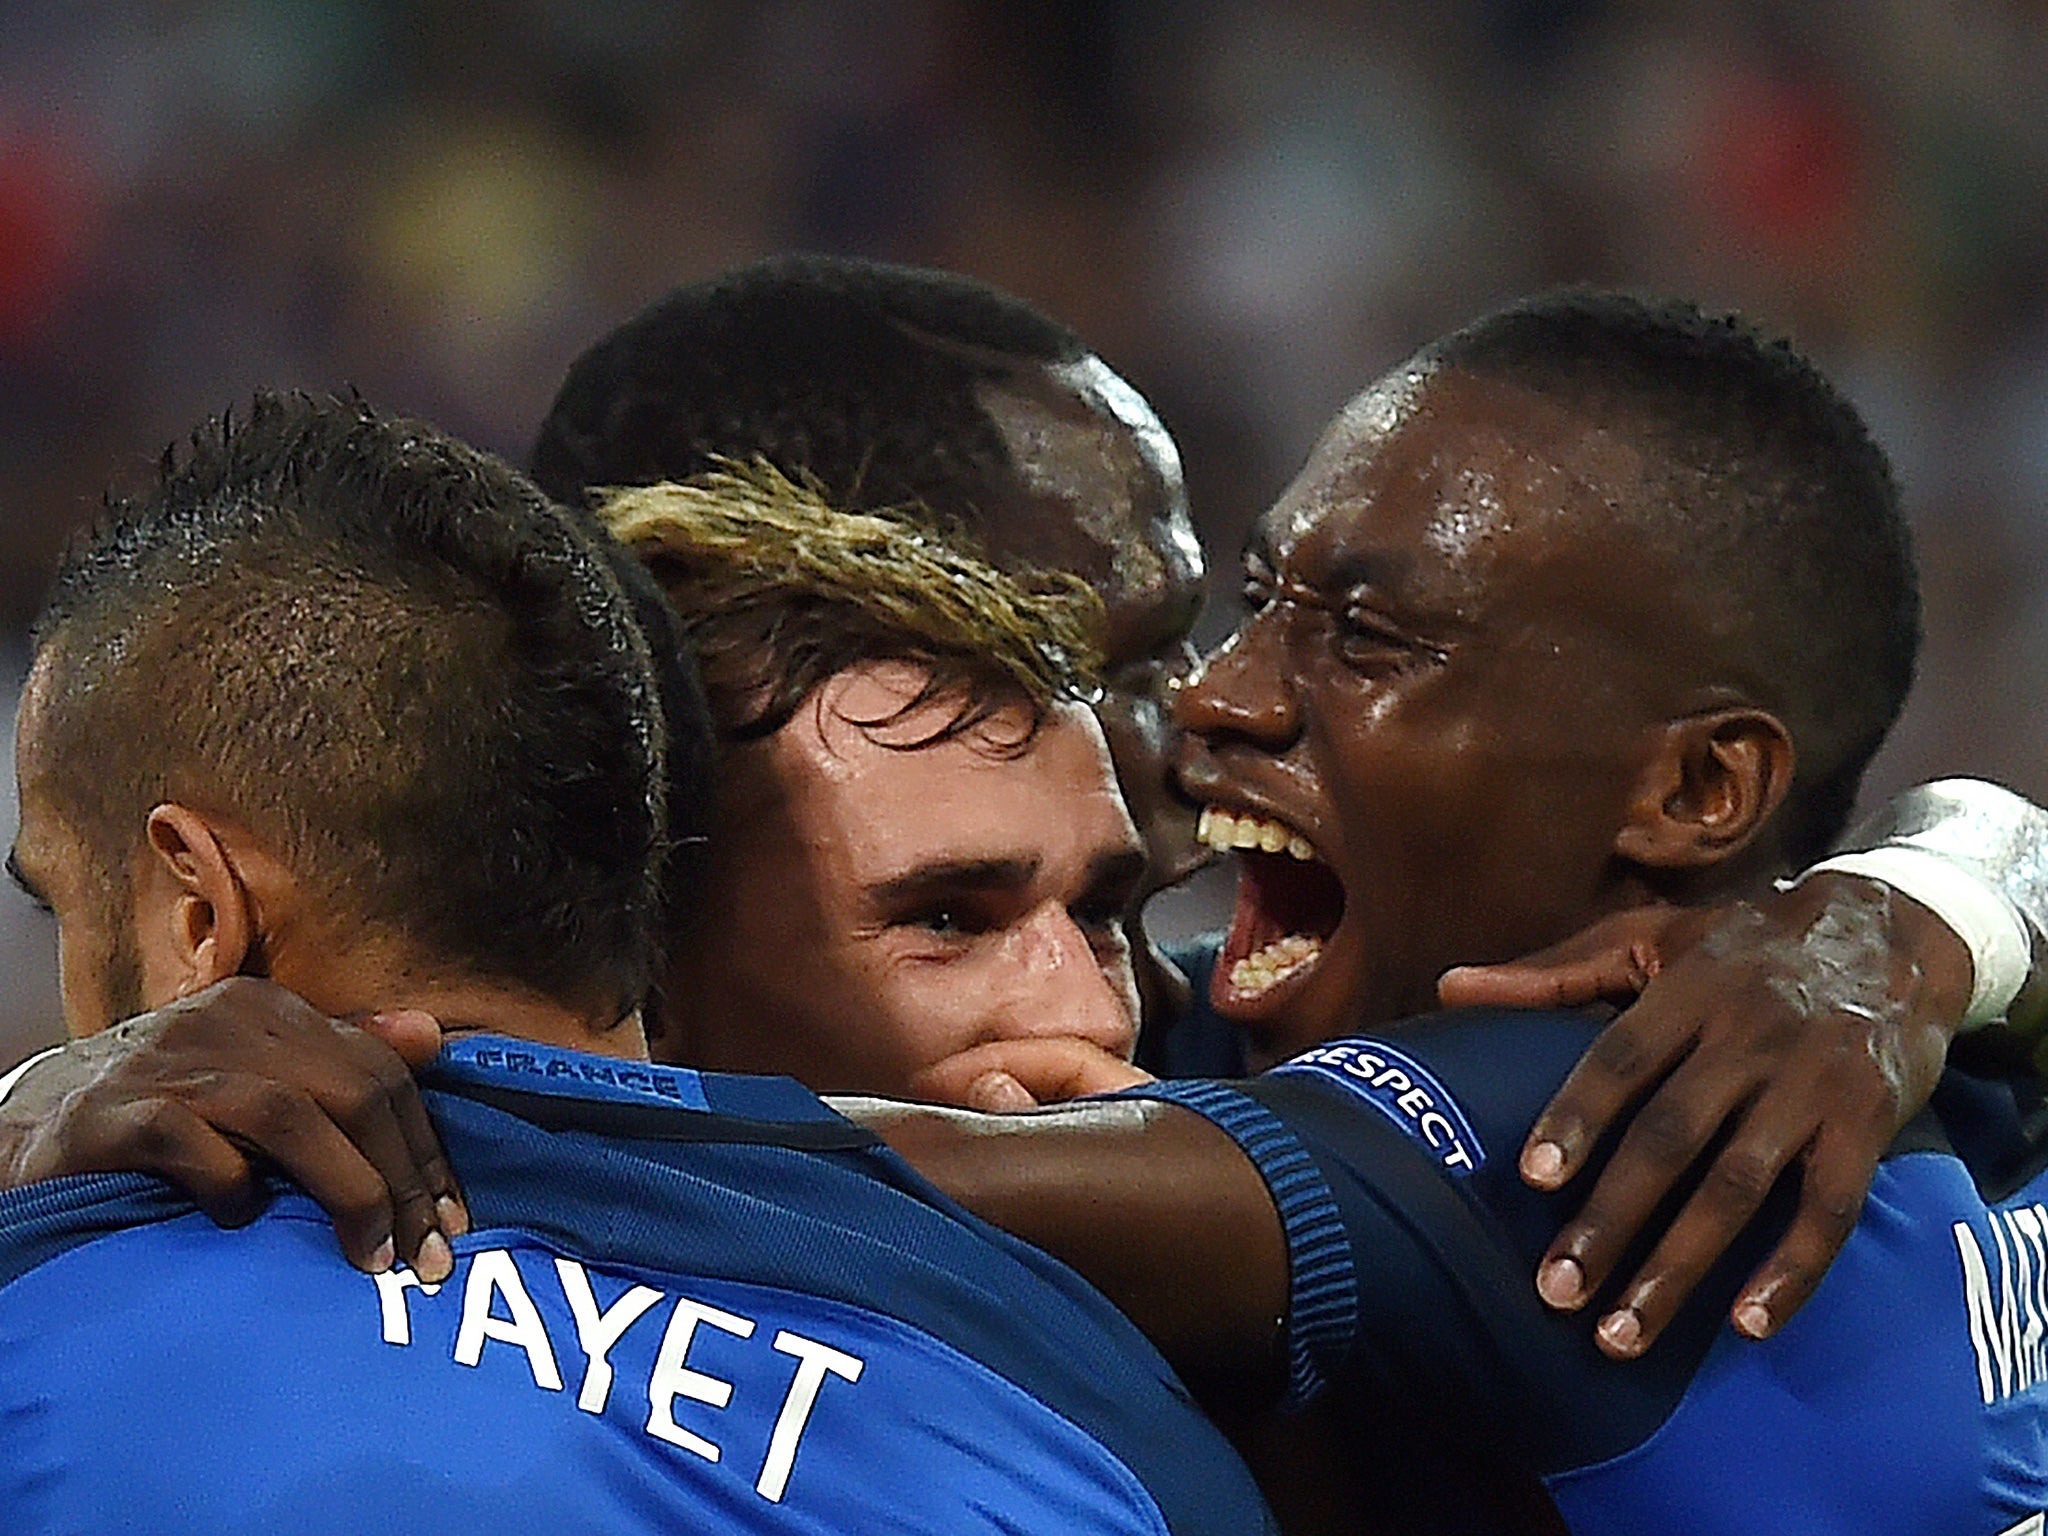 Griezmann was mobbed by his teammates after doubling France's lead